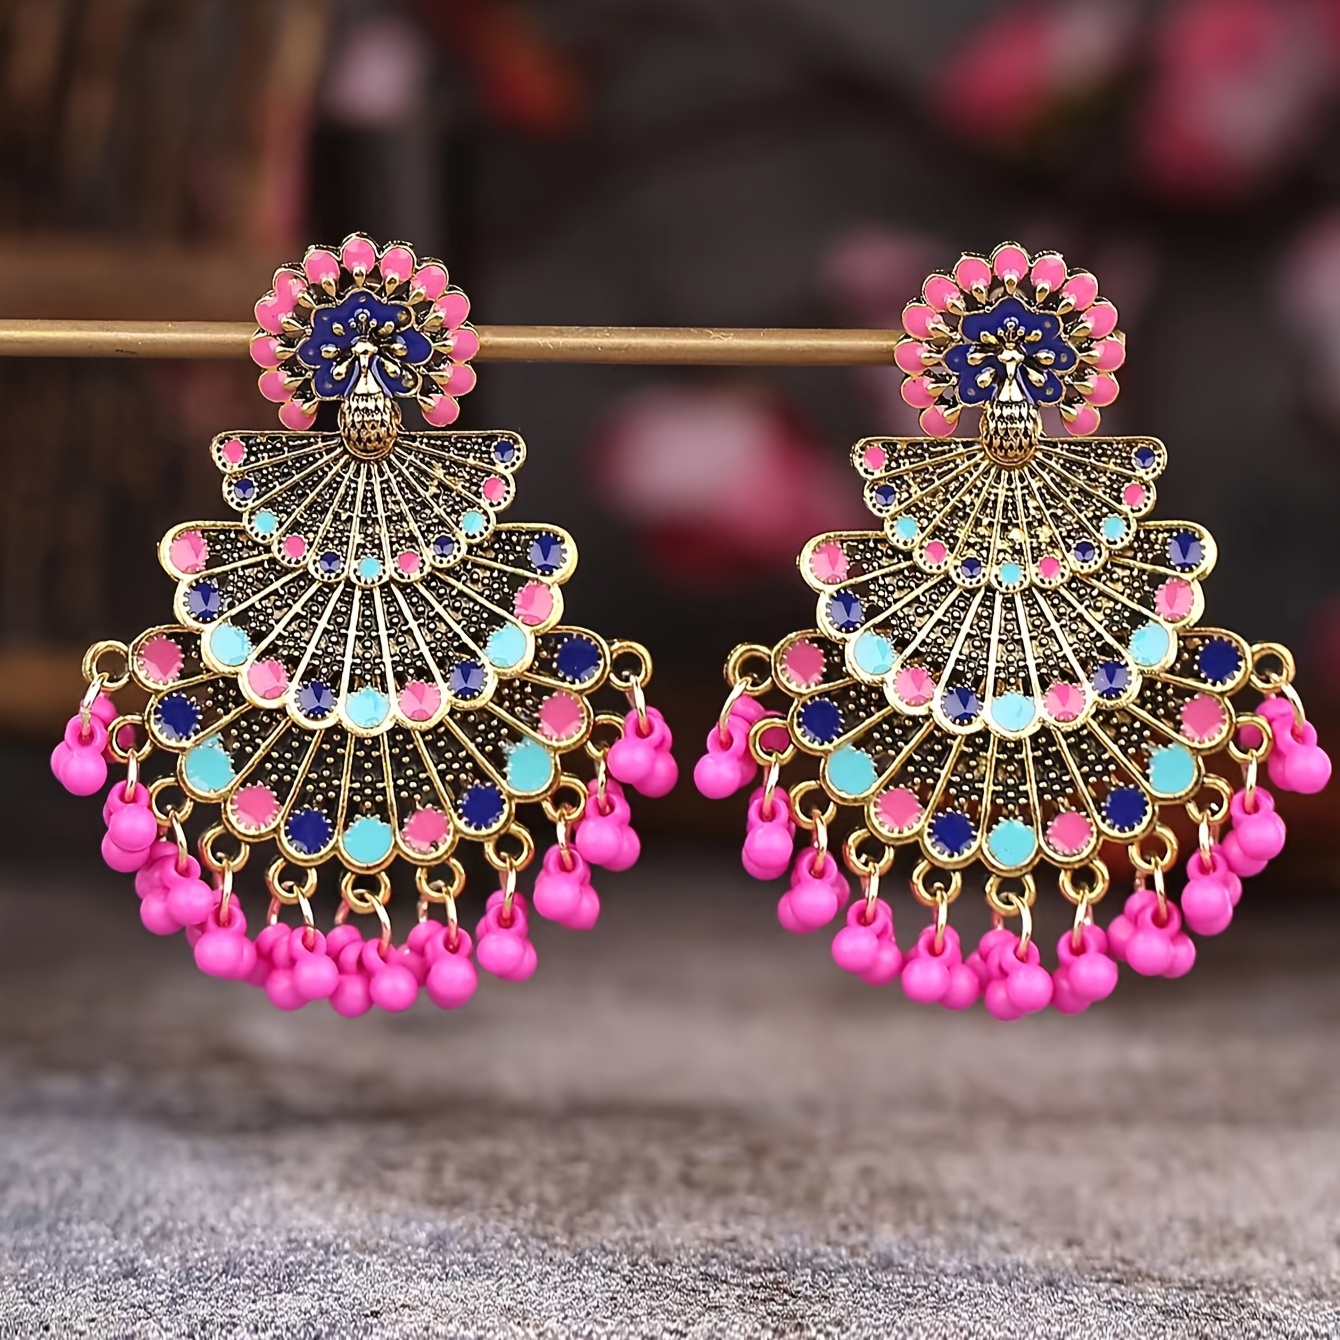 

Vintage Peacock Tail Design Beads Decor Dangle Earrings Retro Bollywood Style Zinc Alloy Jewelry Delicate Female Gift